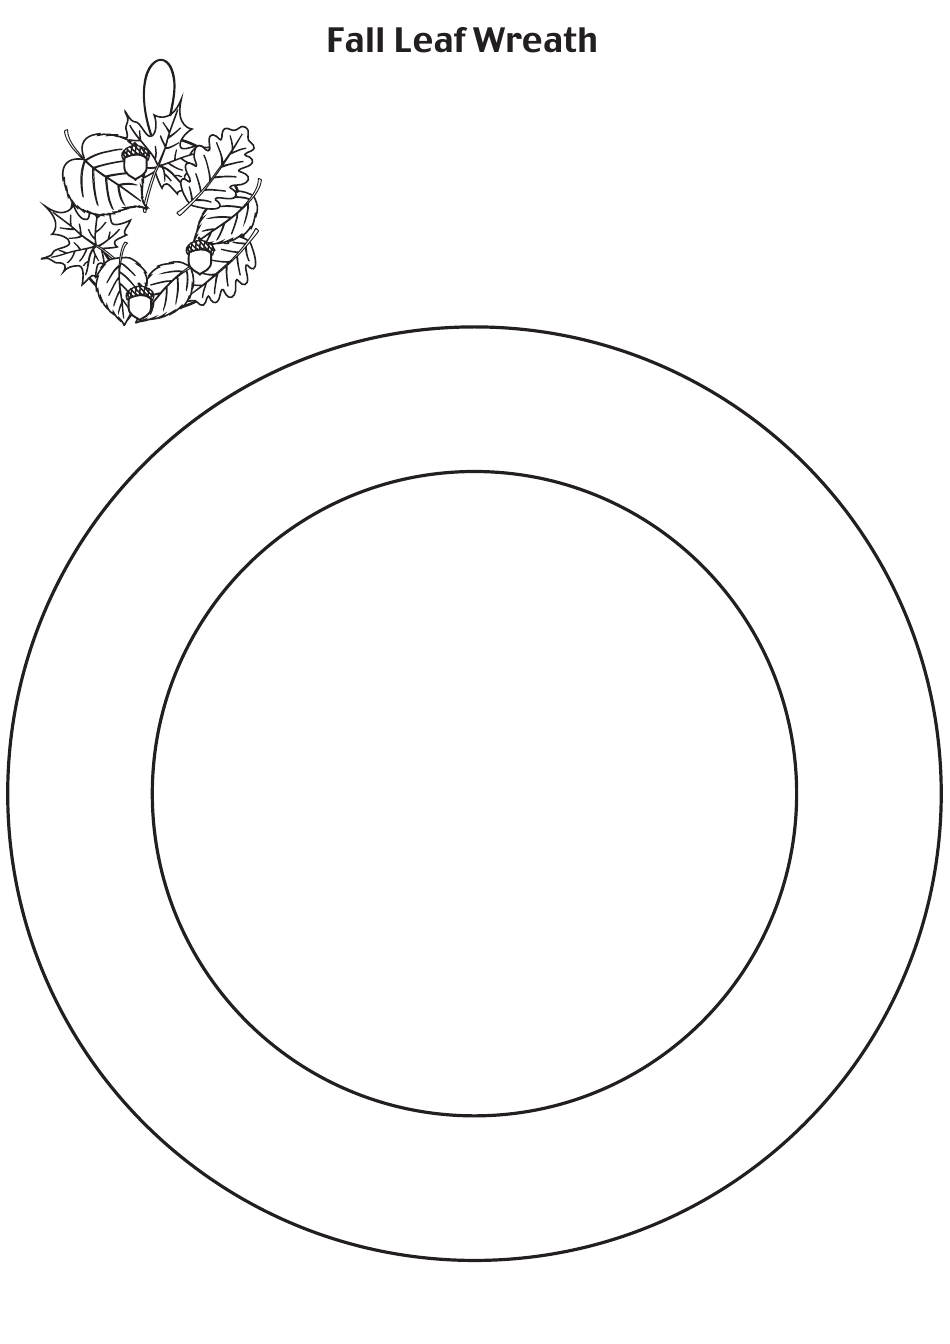 Fall Leaf Wreath Template, Page 1